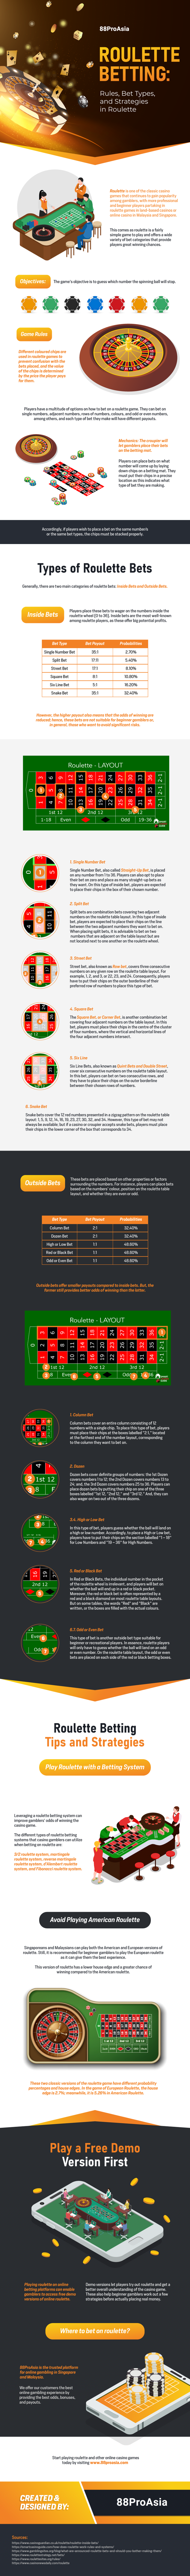 Online-Roulette-Betting-Rules-Bet-Types-Strategies-Infographic